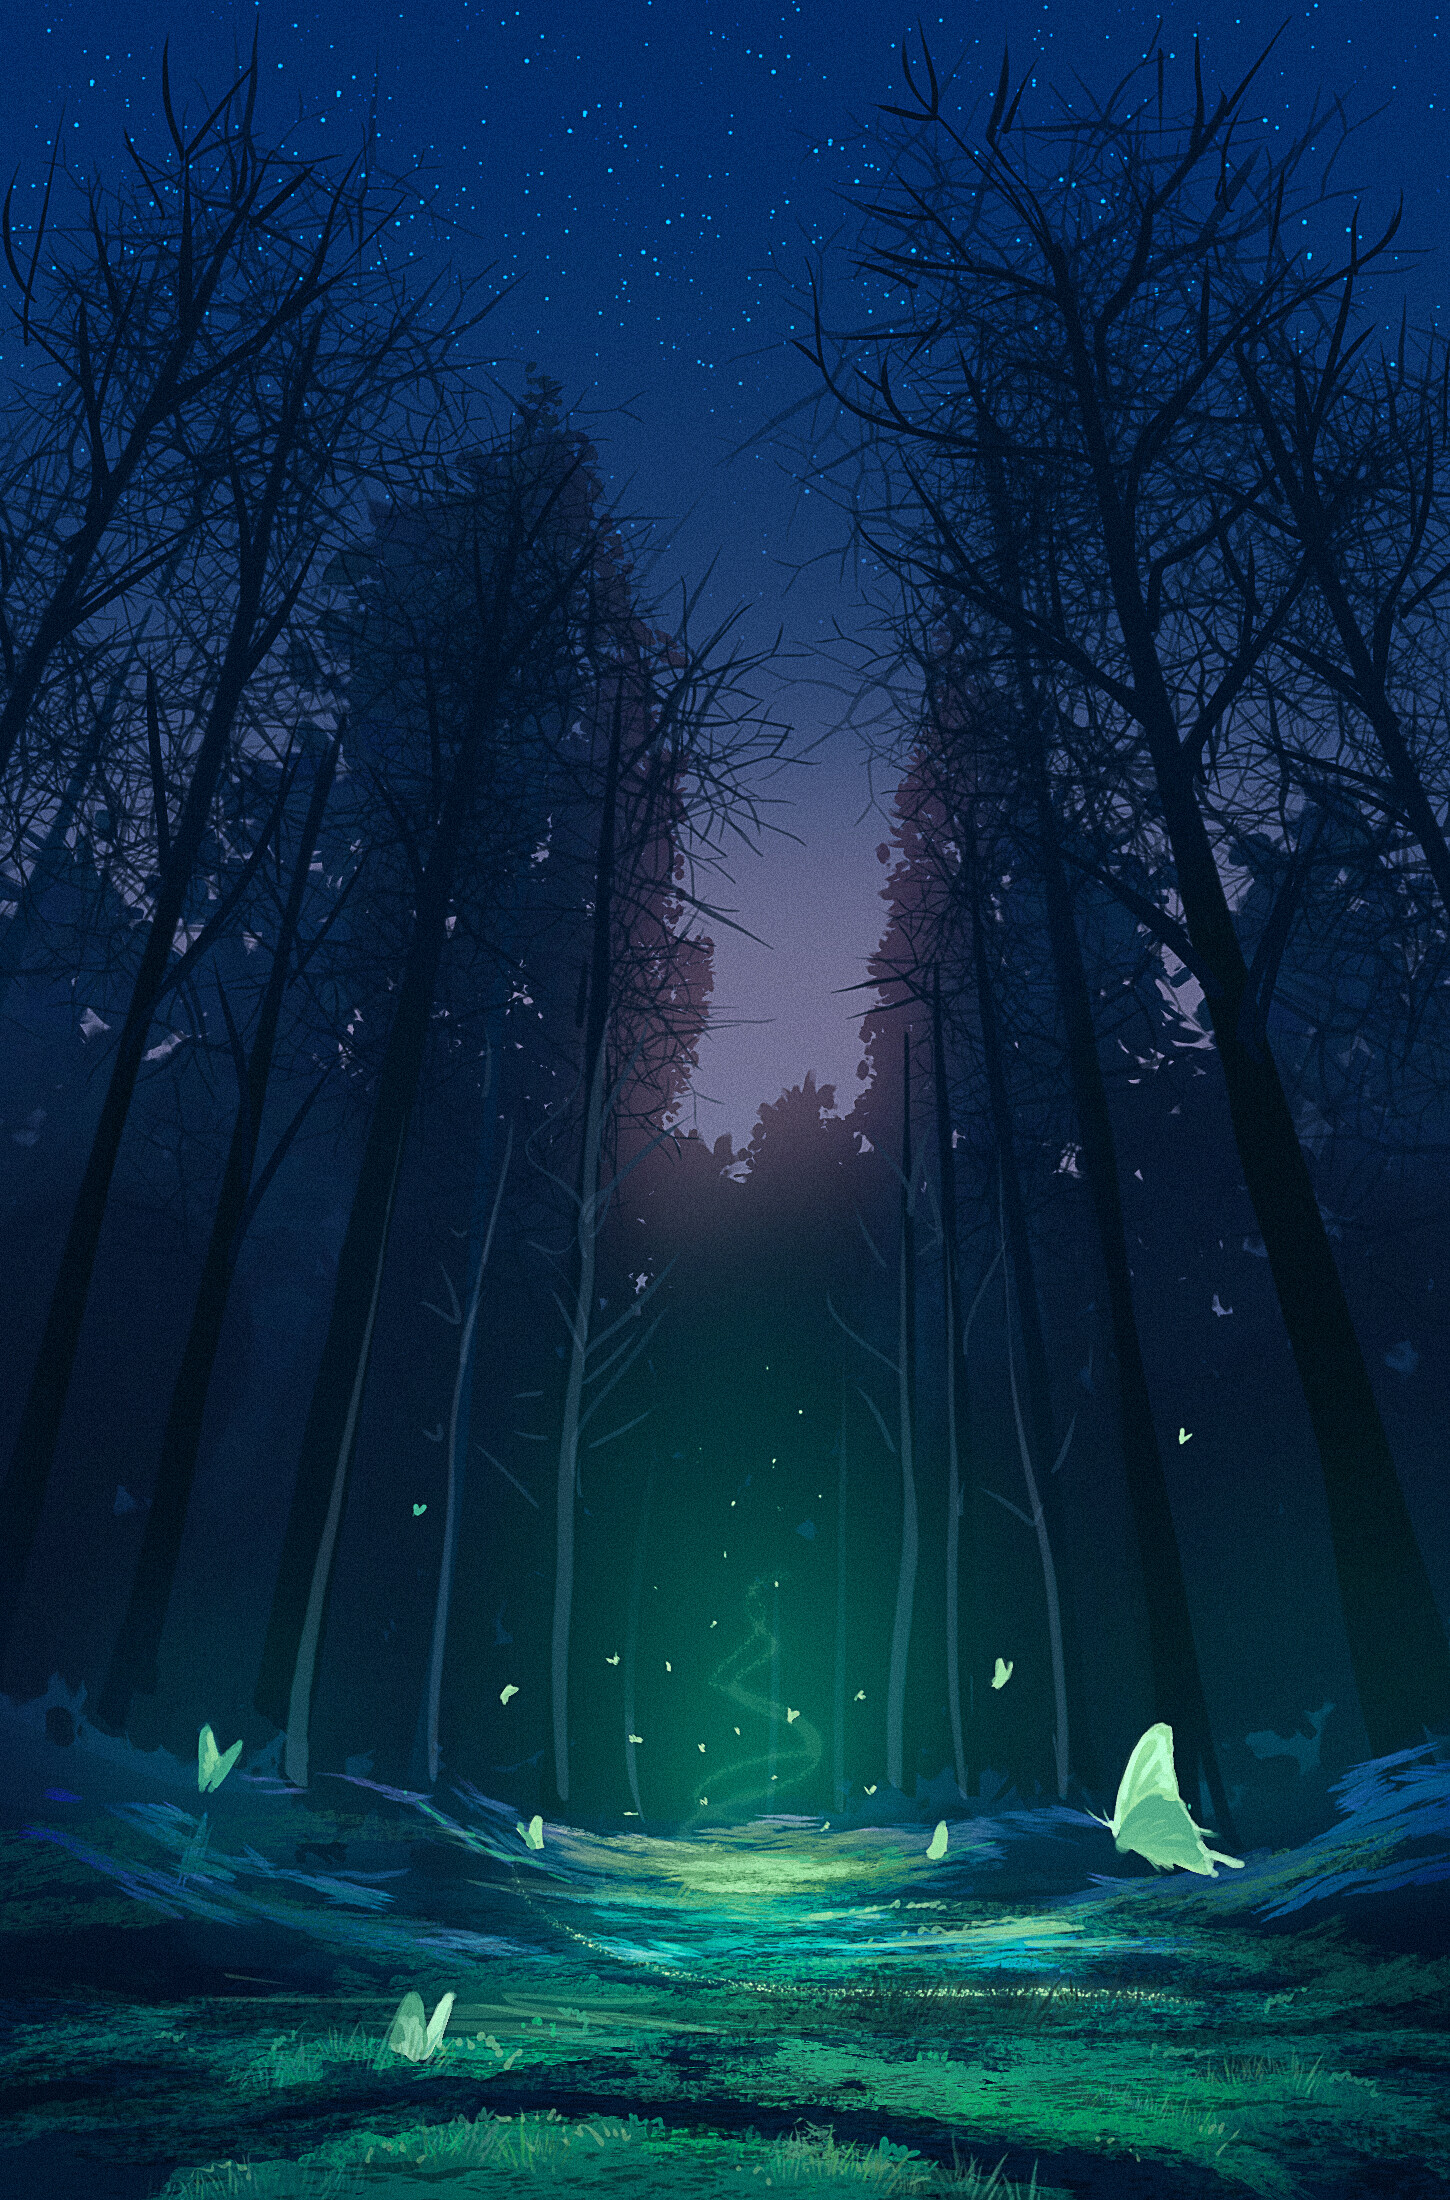 Mobile wallpaper: Art, Magic, Fantasy, Butterflies, Forest, 67940 download the picture for free